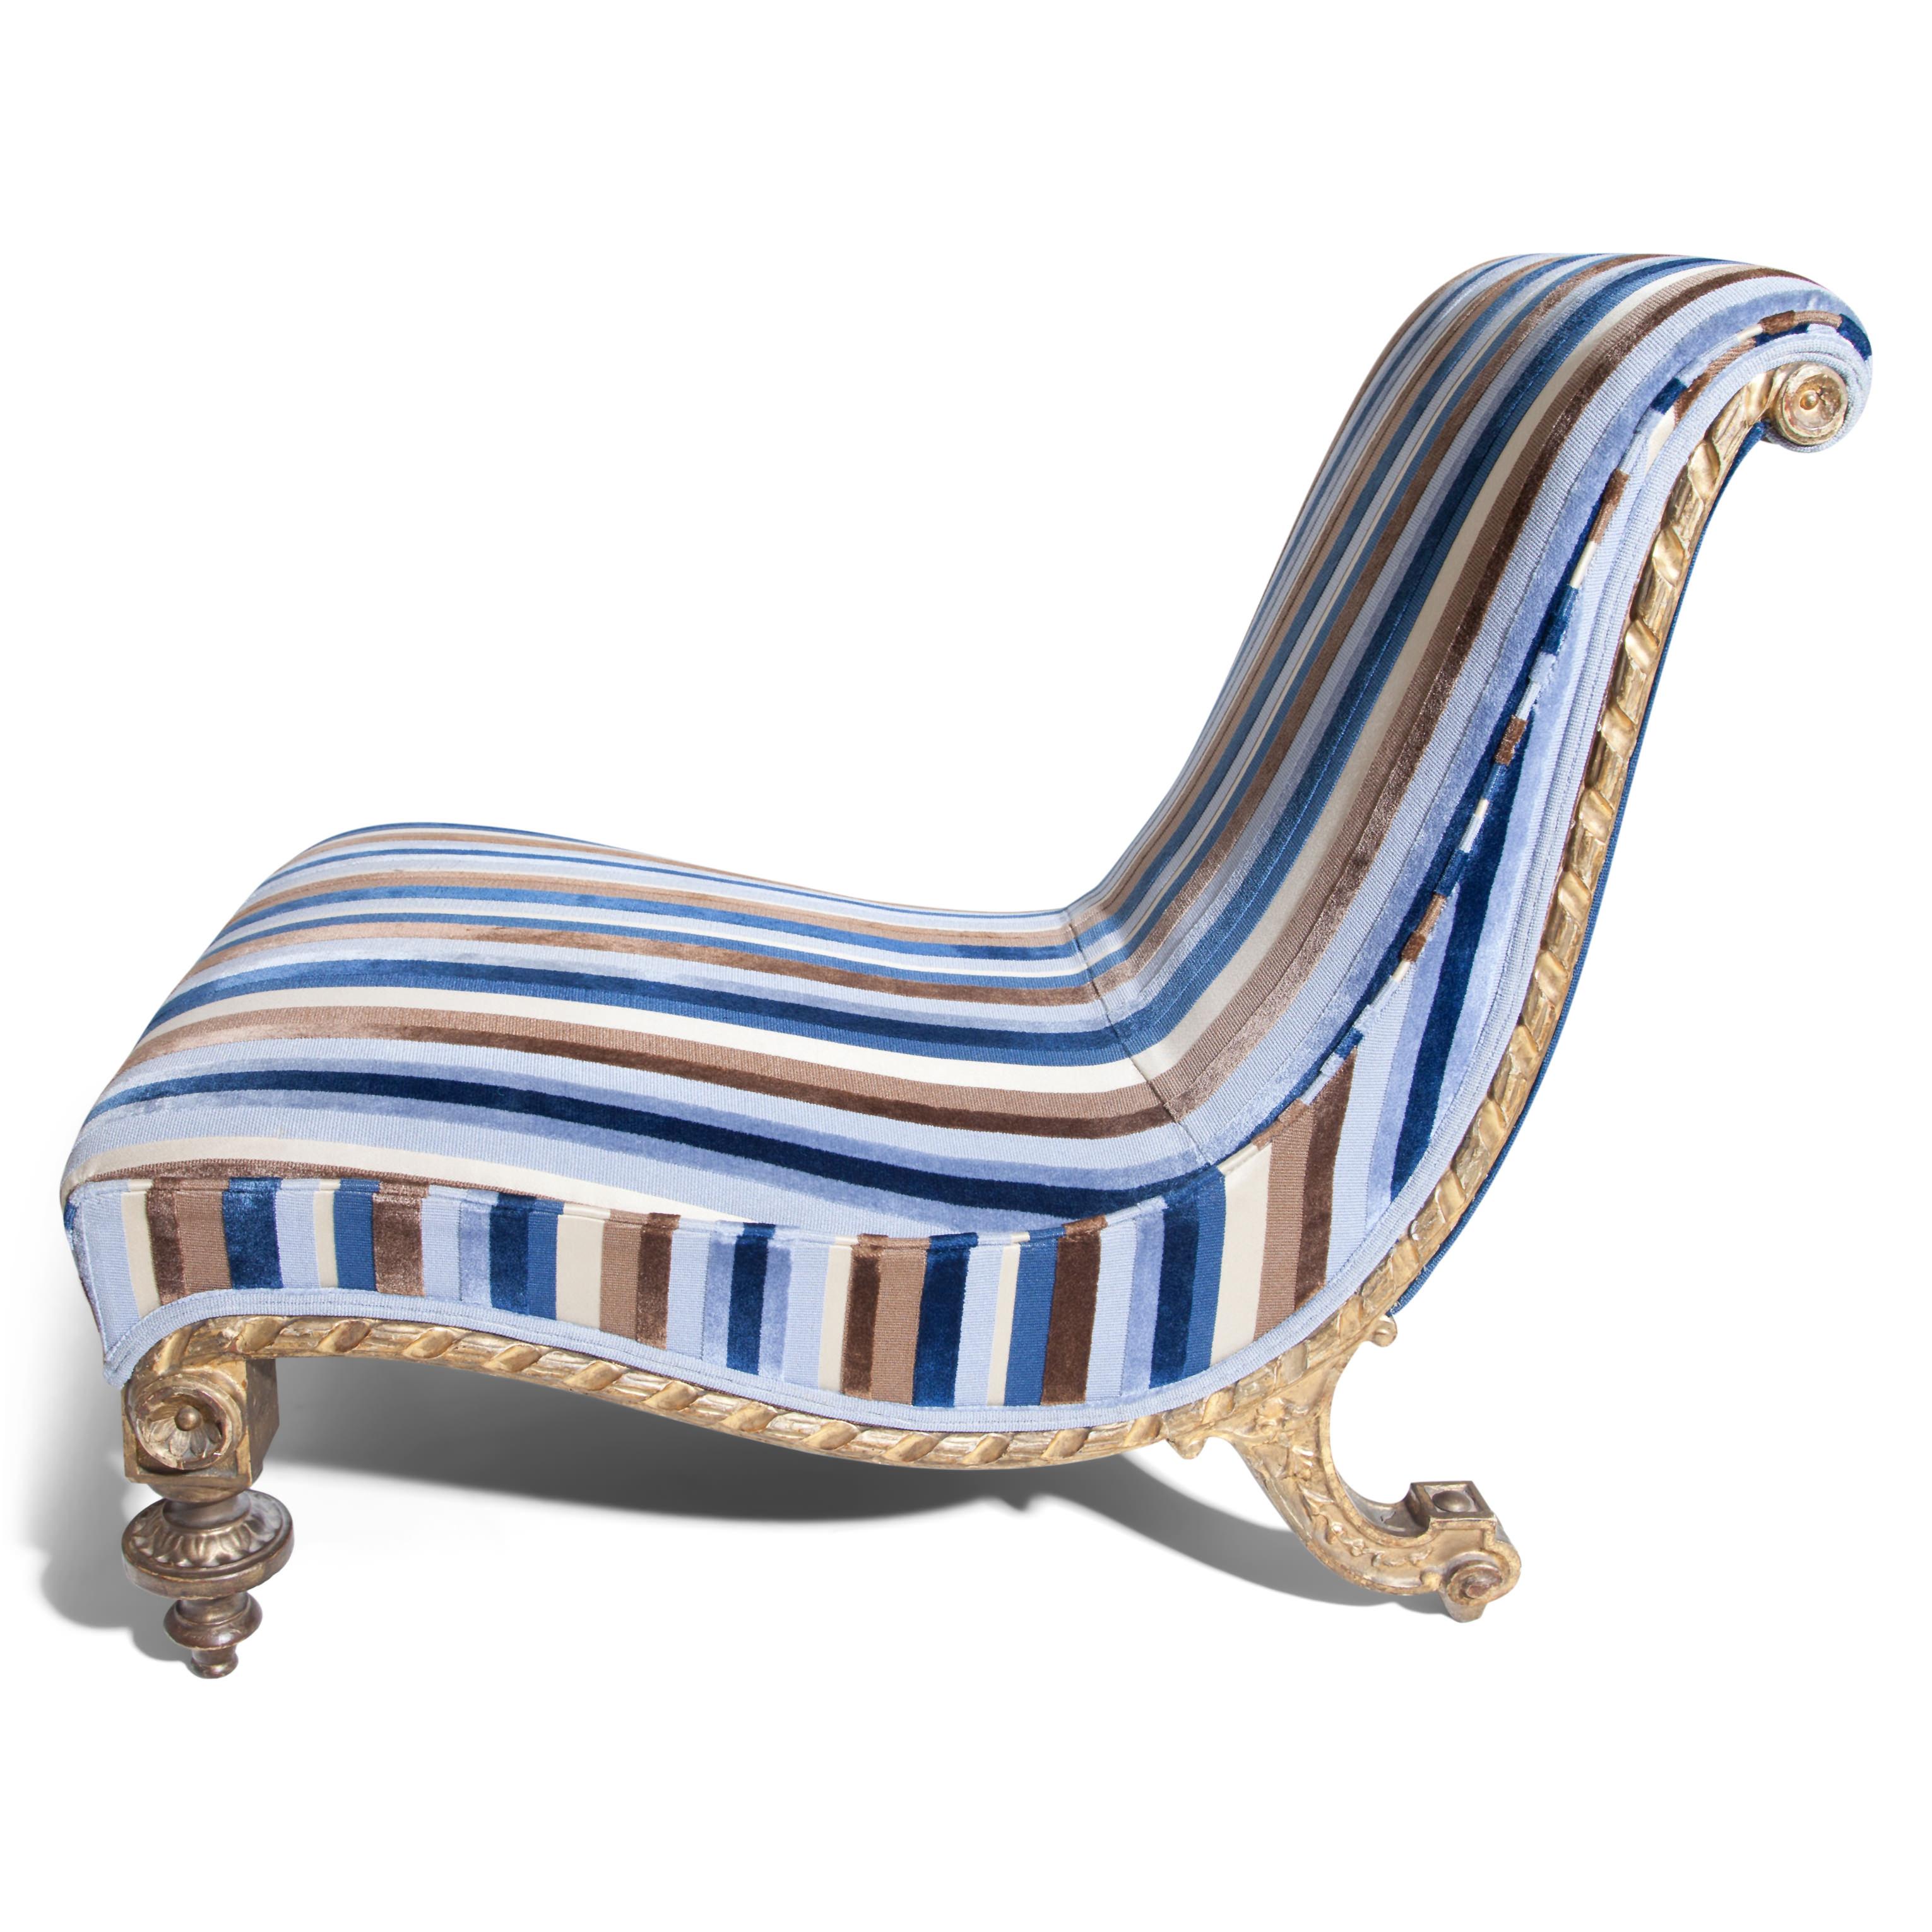 Neoclassical Gilt Lounge Chair, Italy/Lucca, circa 1825-1830